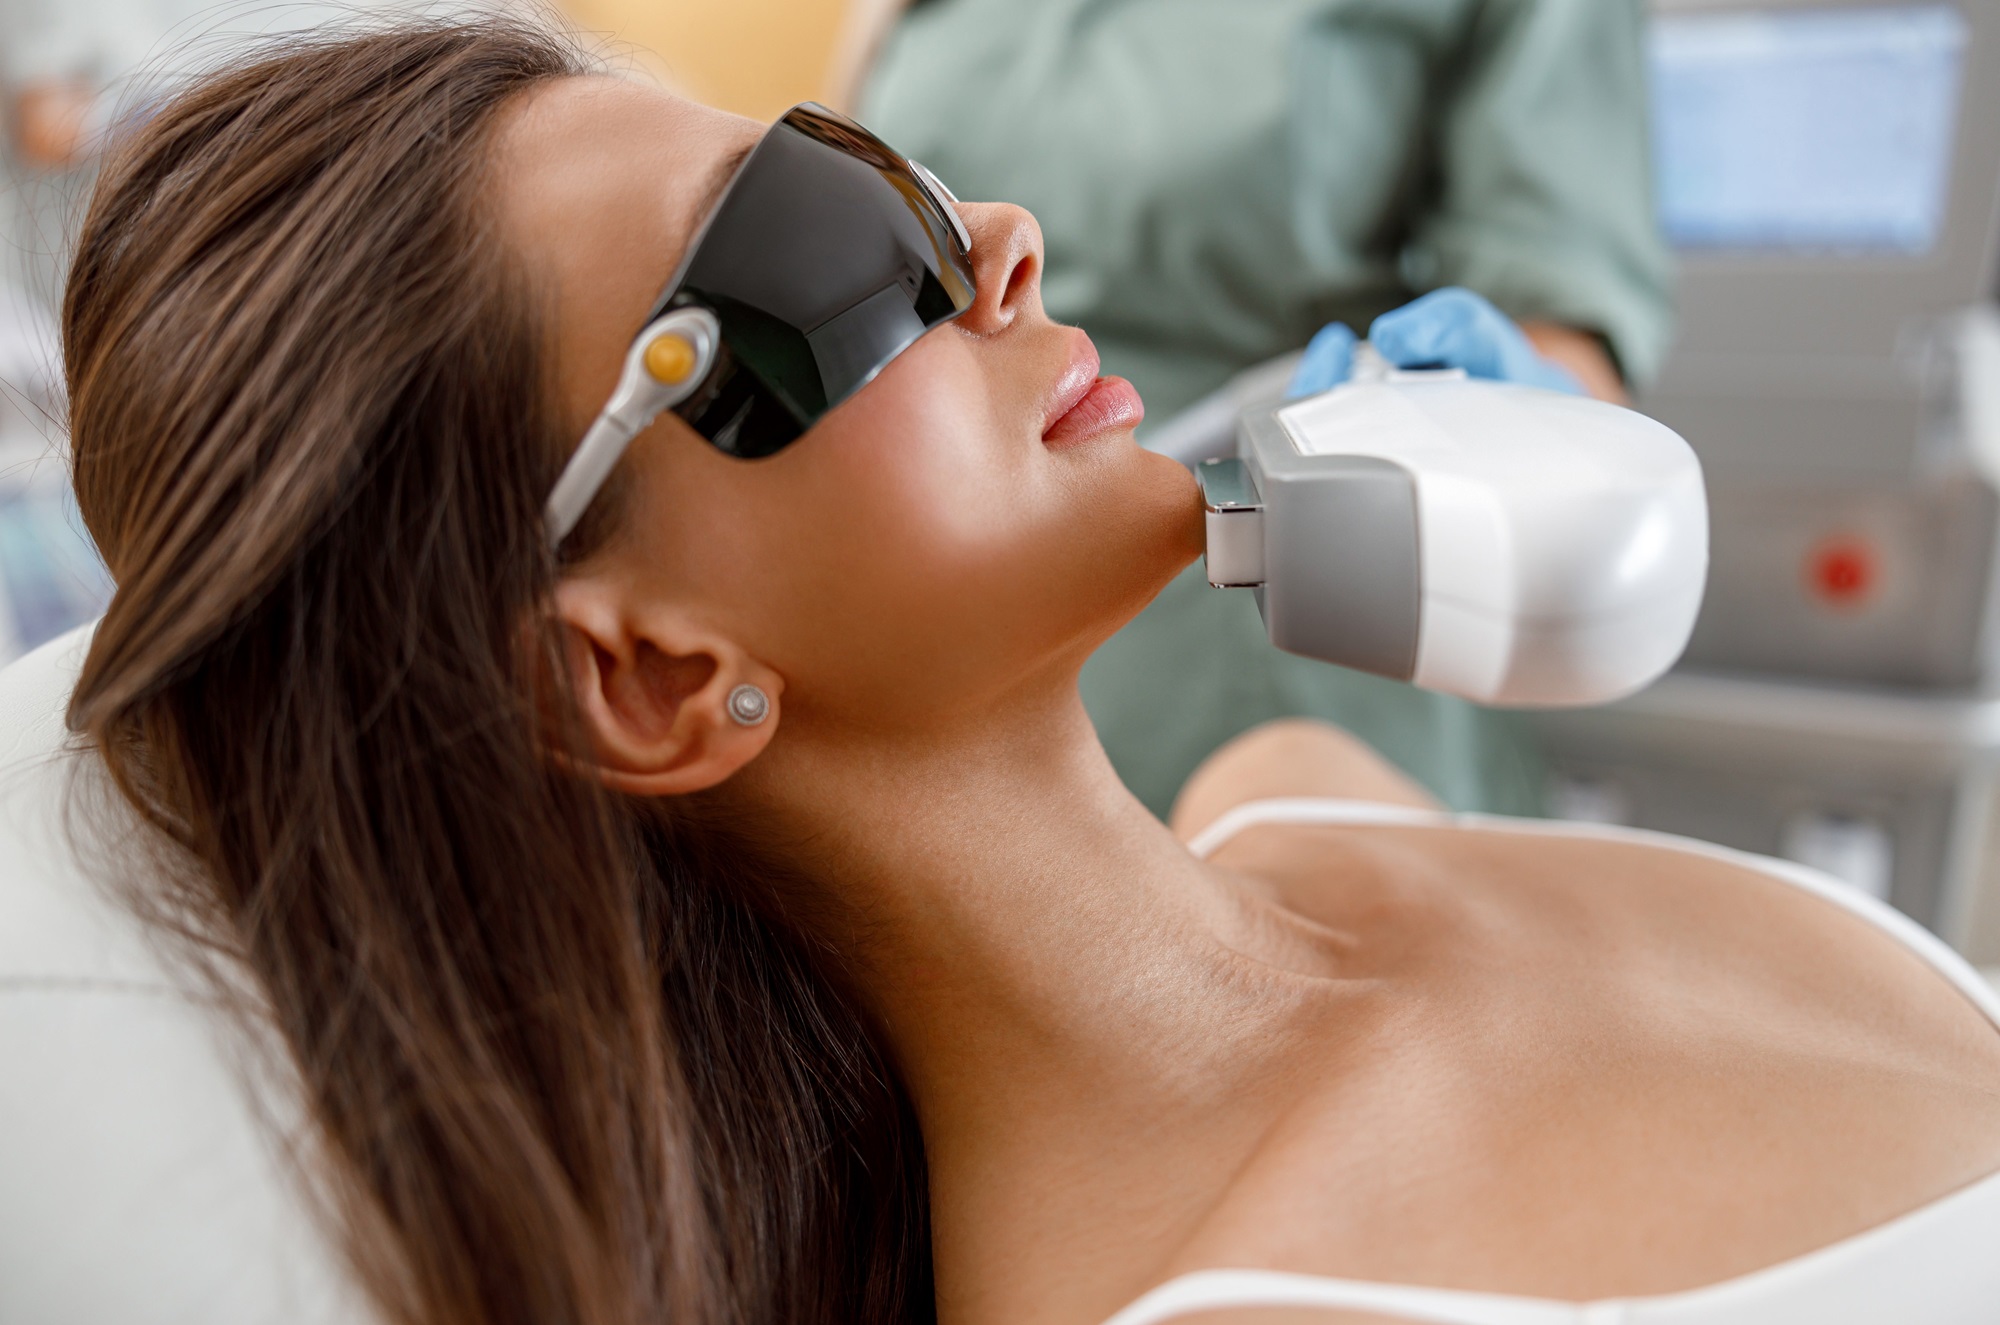 What You Need to Know About Laser Hair Removal